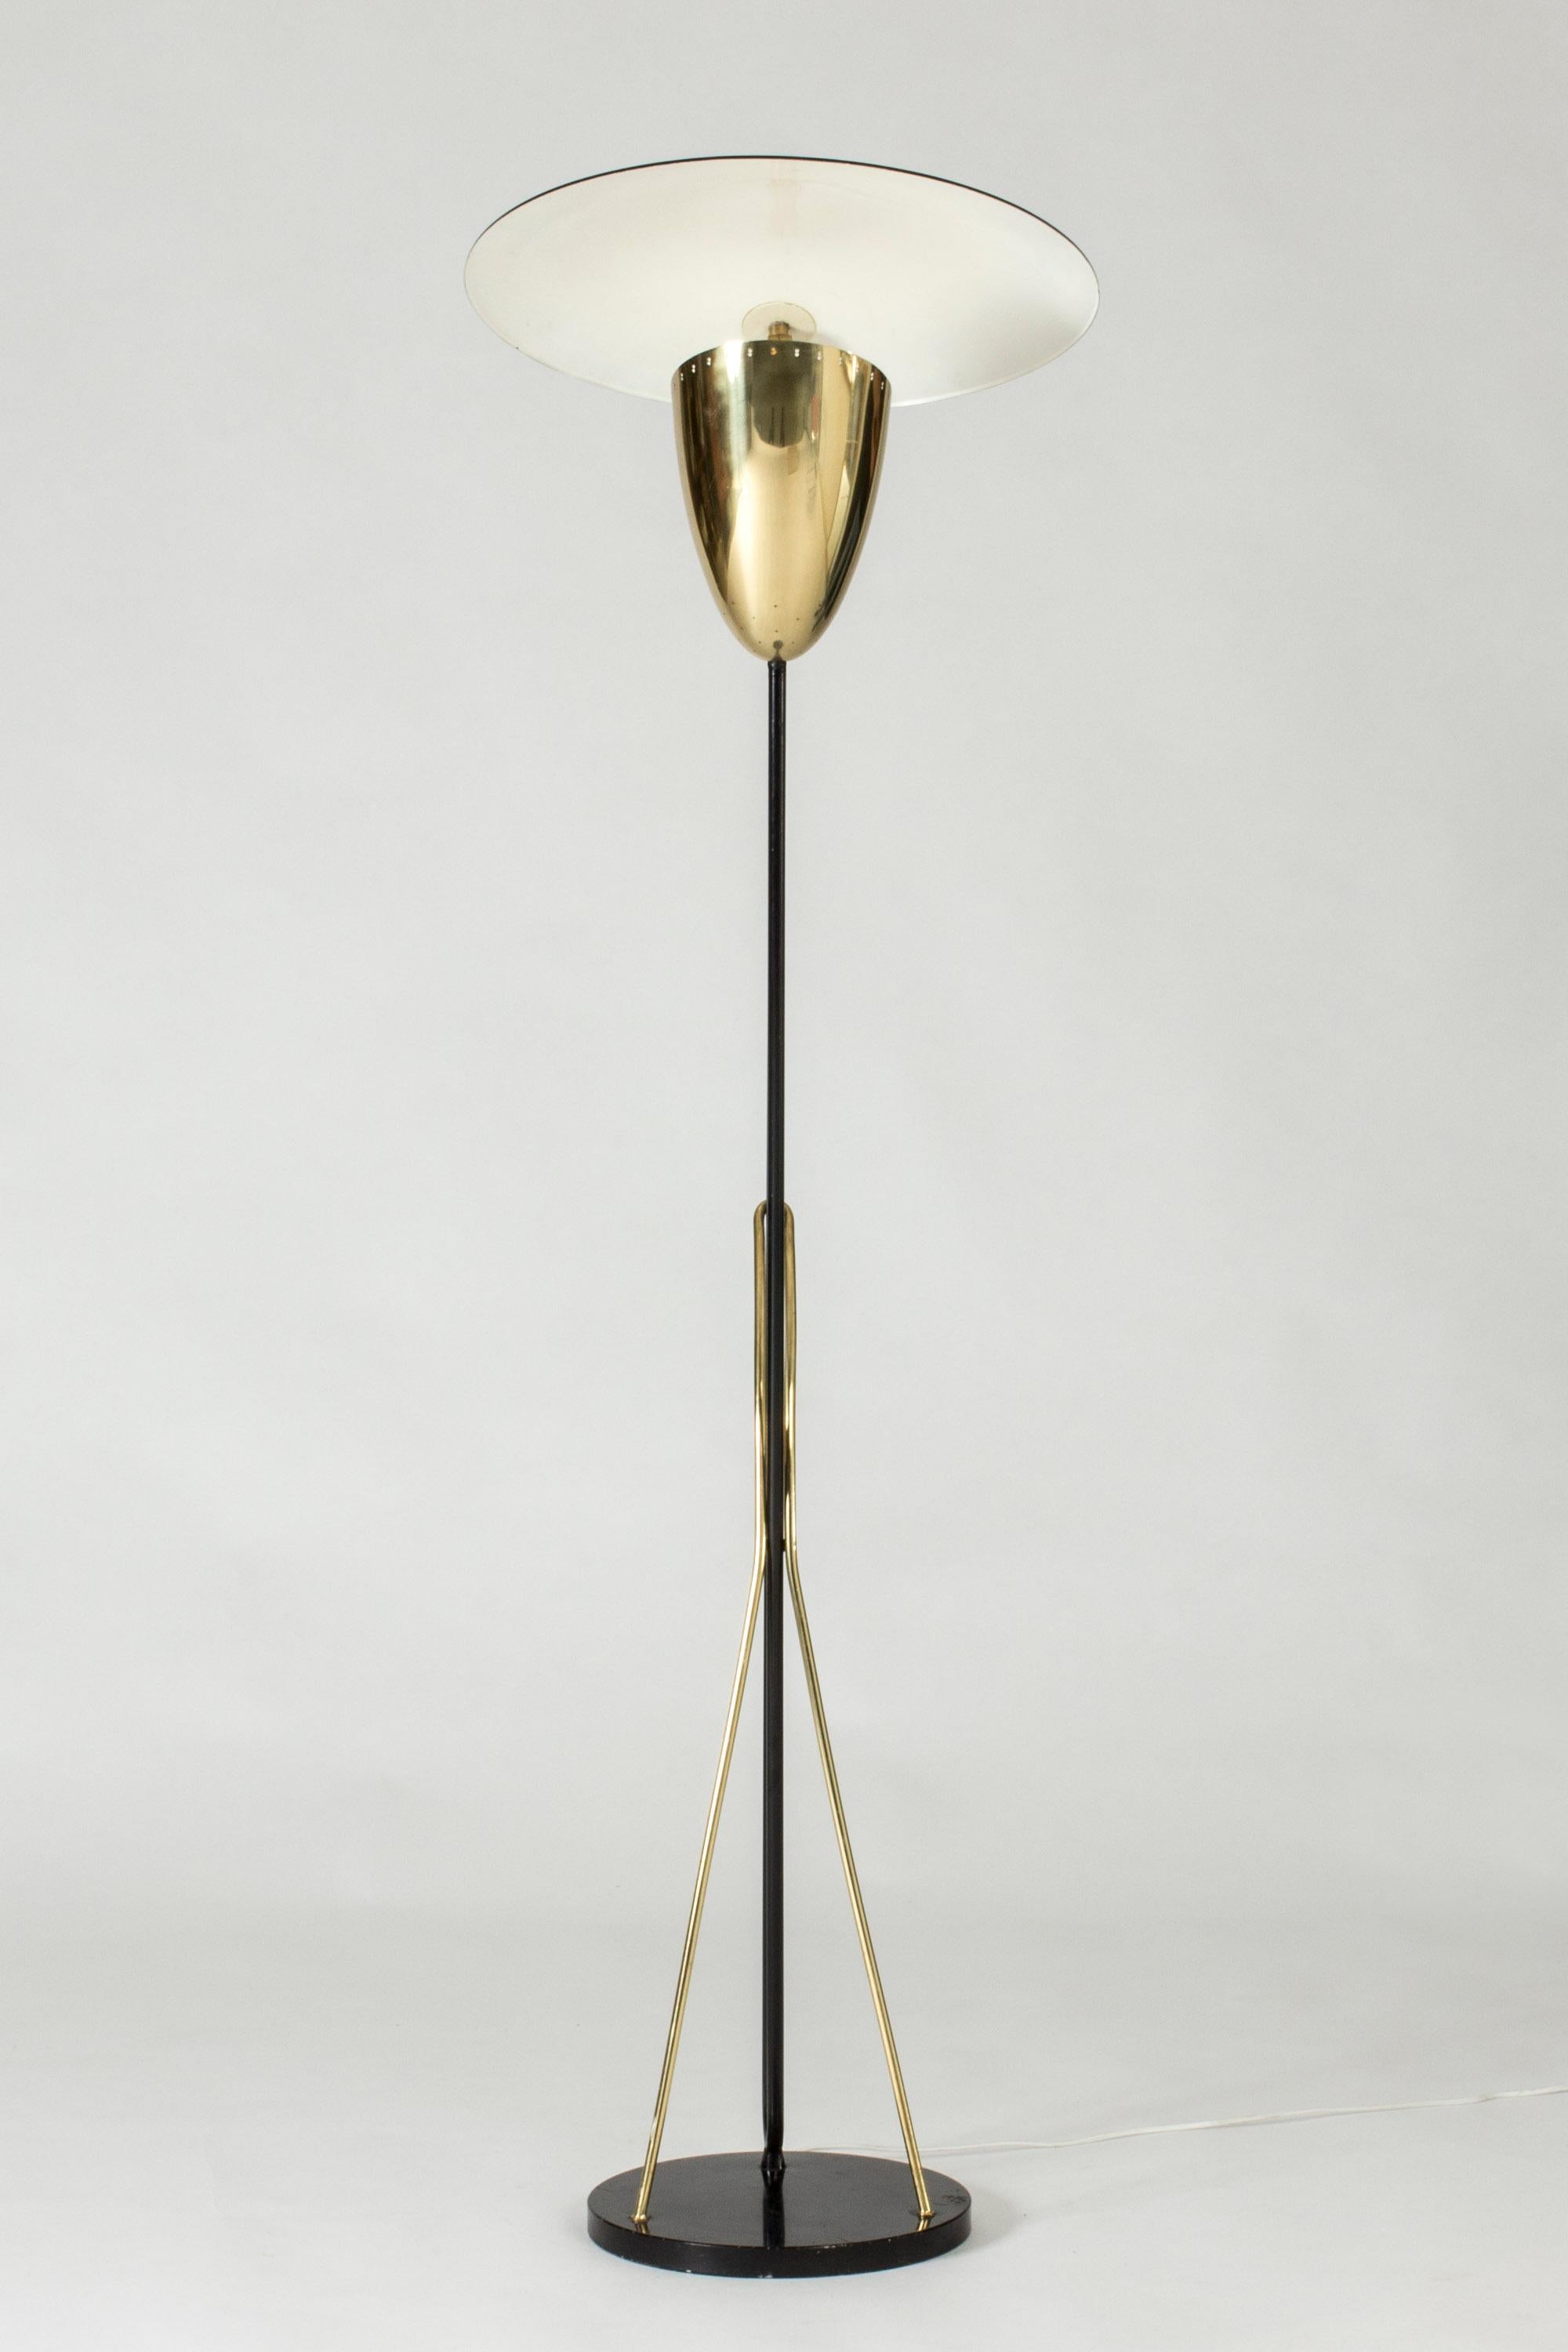 Scandinavian Modern Lacquered Metal and Brass Floor Lamp by Svend Aage Holm Sørensen, Denmark For Sale